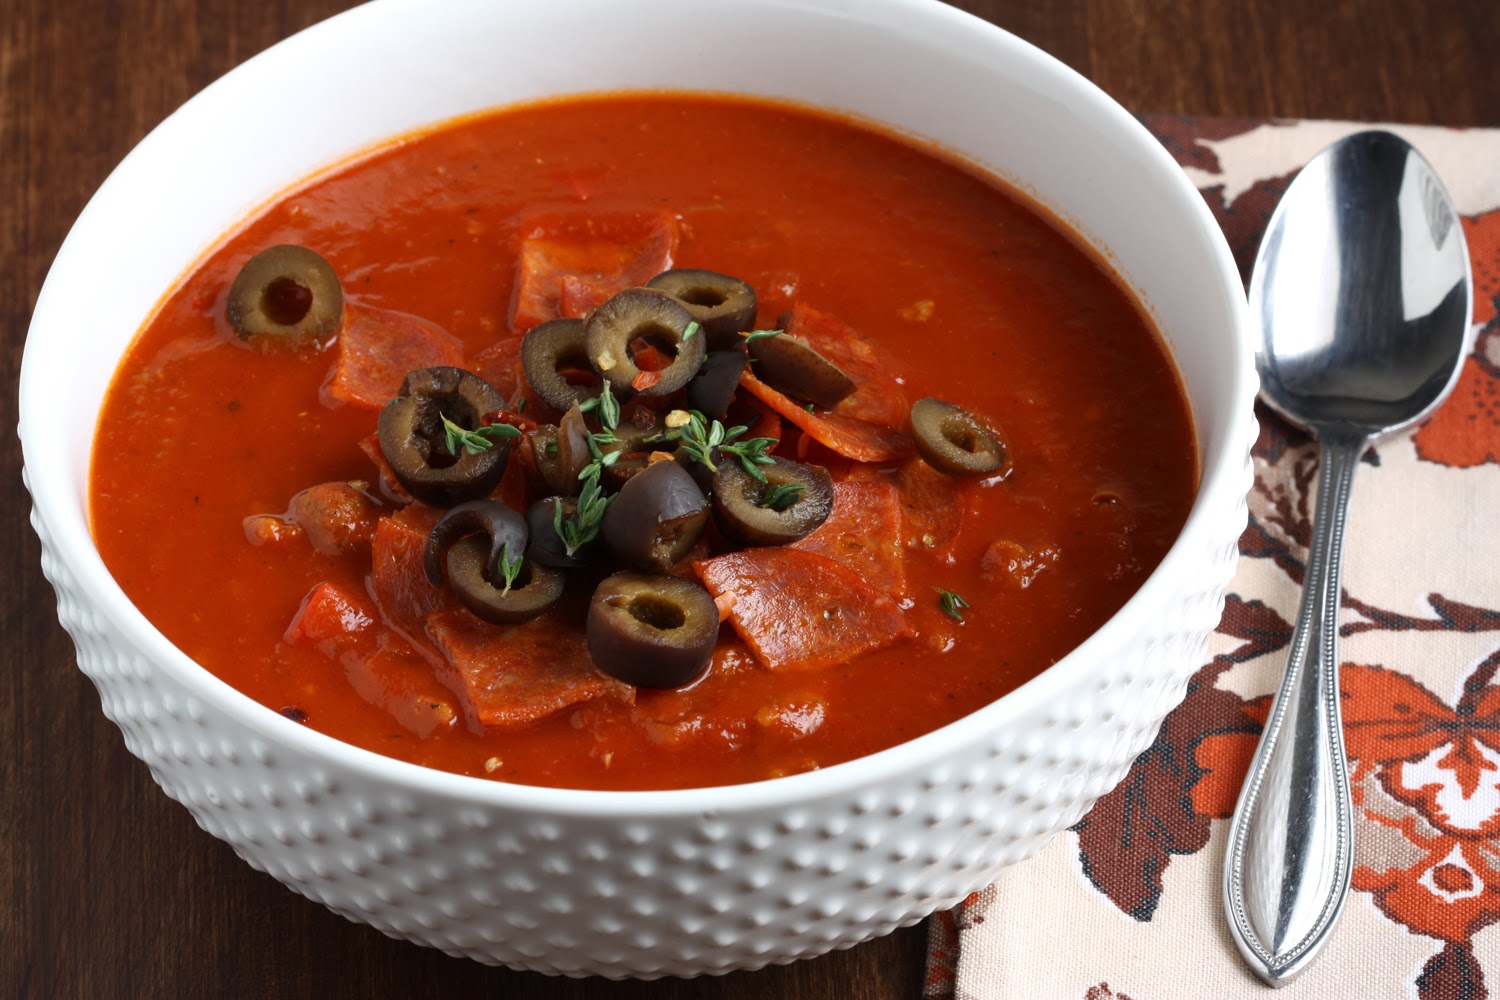 ... recipe for this paleo pizza soup from paleo girl s kitchen on their